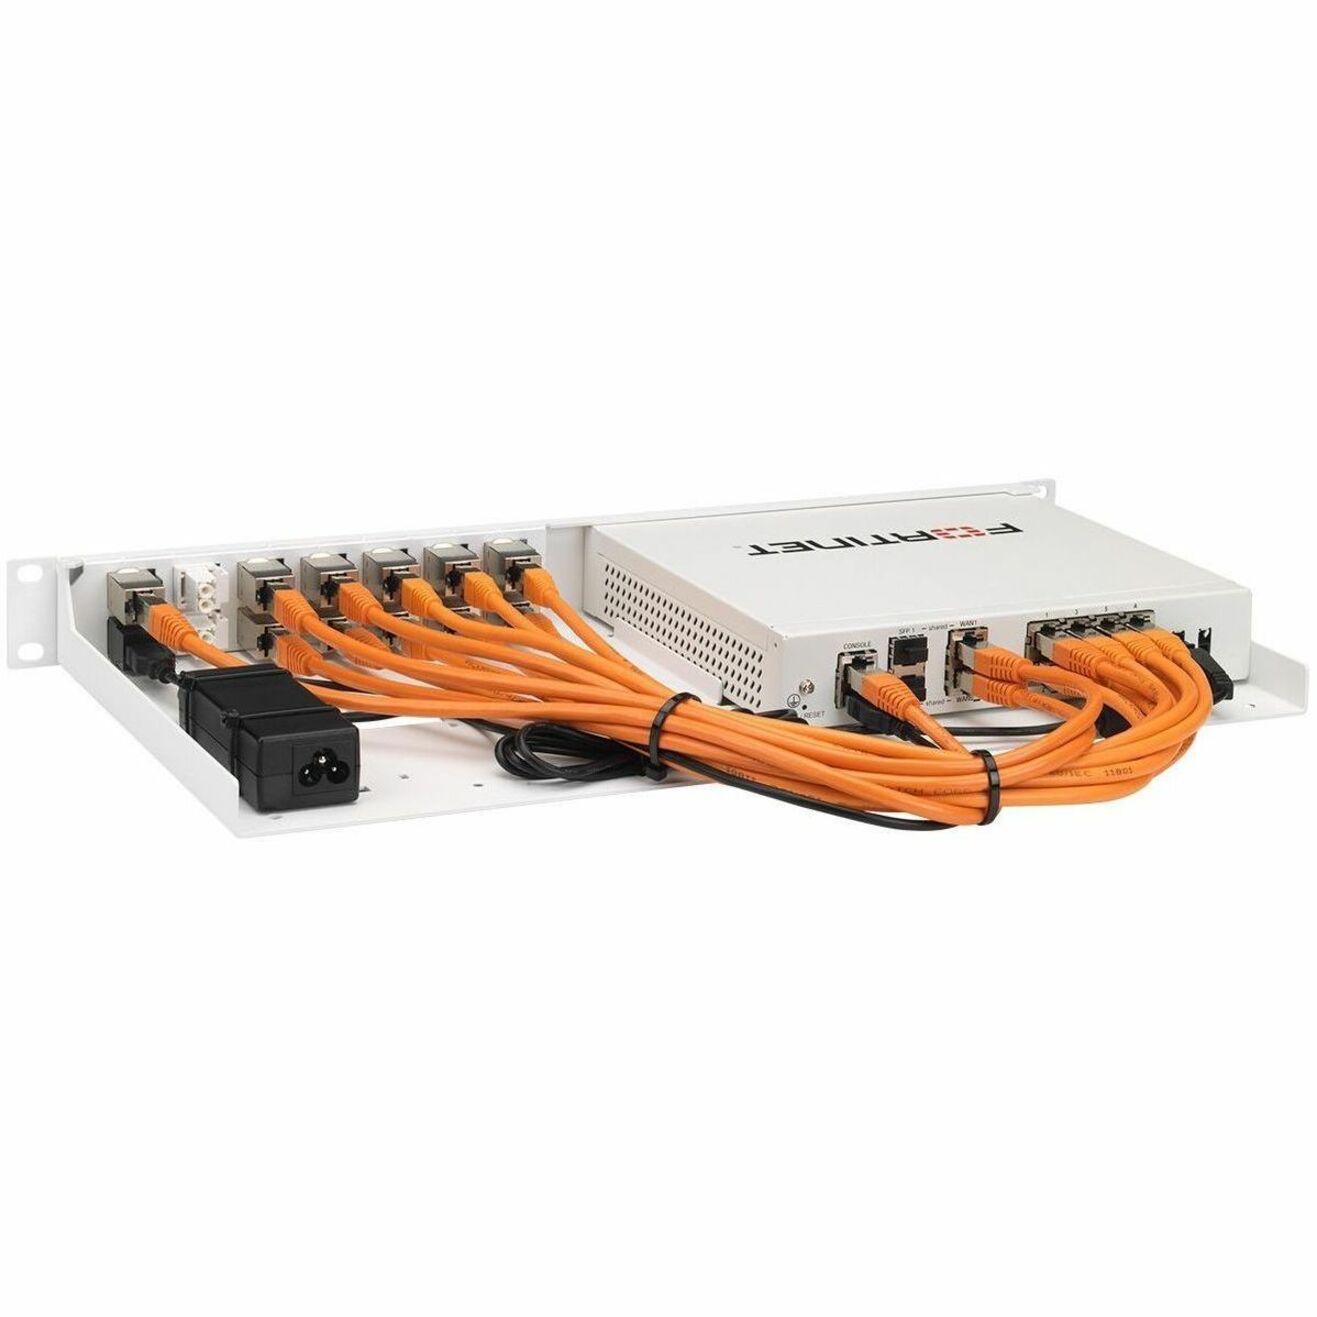 RACKMOUNT.IT RM-FR-T15I FortiRack Rackmount Kit, Network Security/Firewall Appliance Mounting Solution